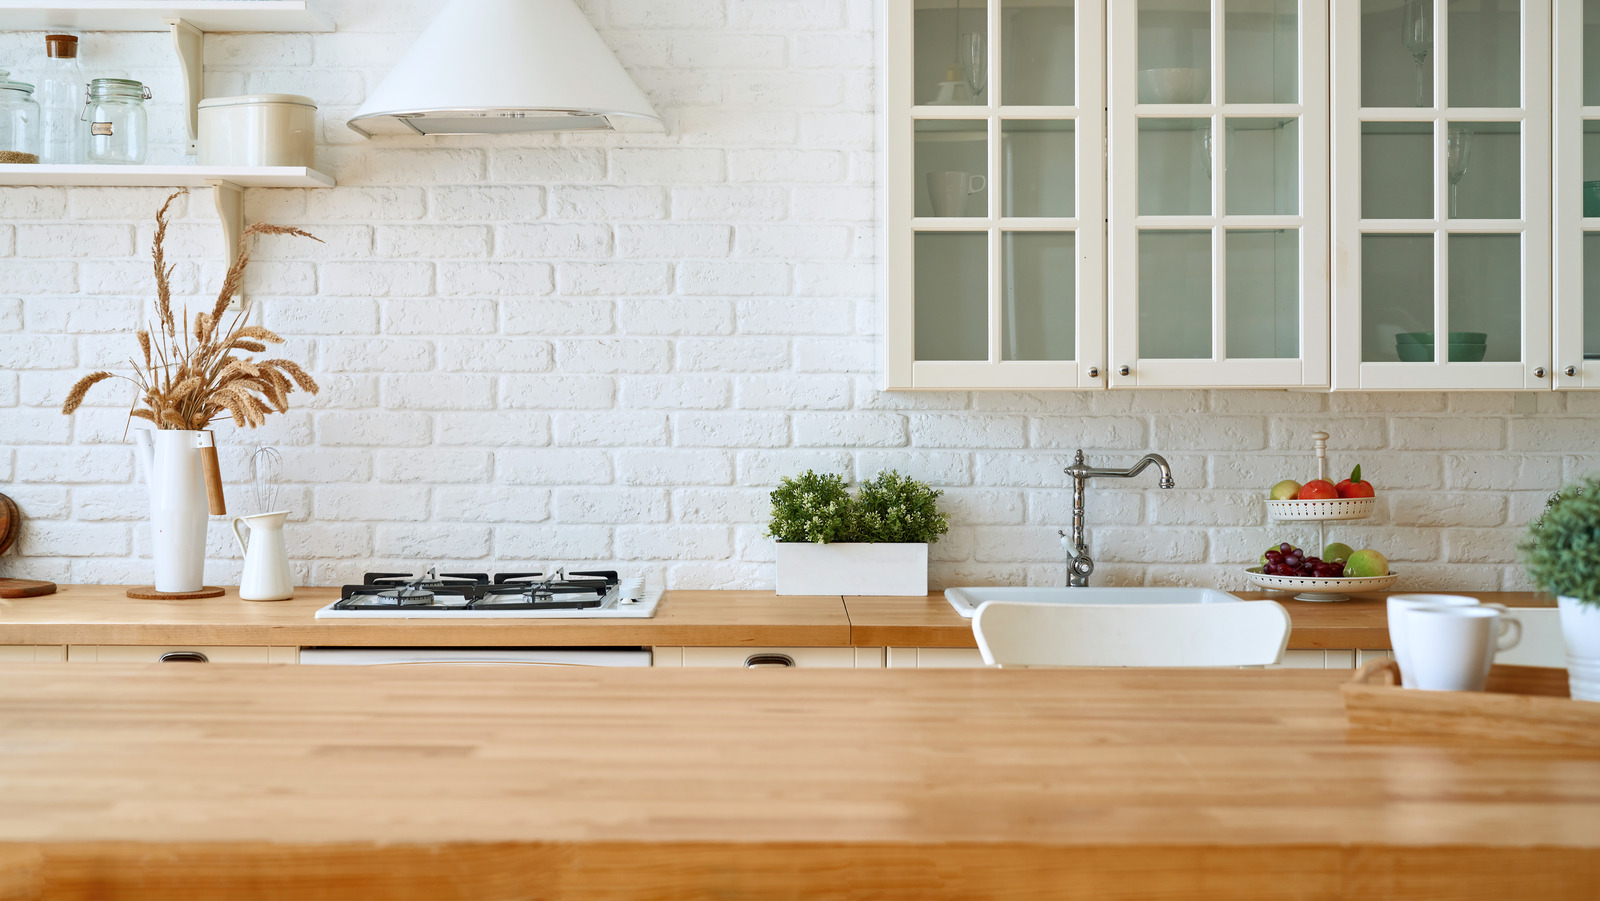 What You Need to Know About Butcher Block